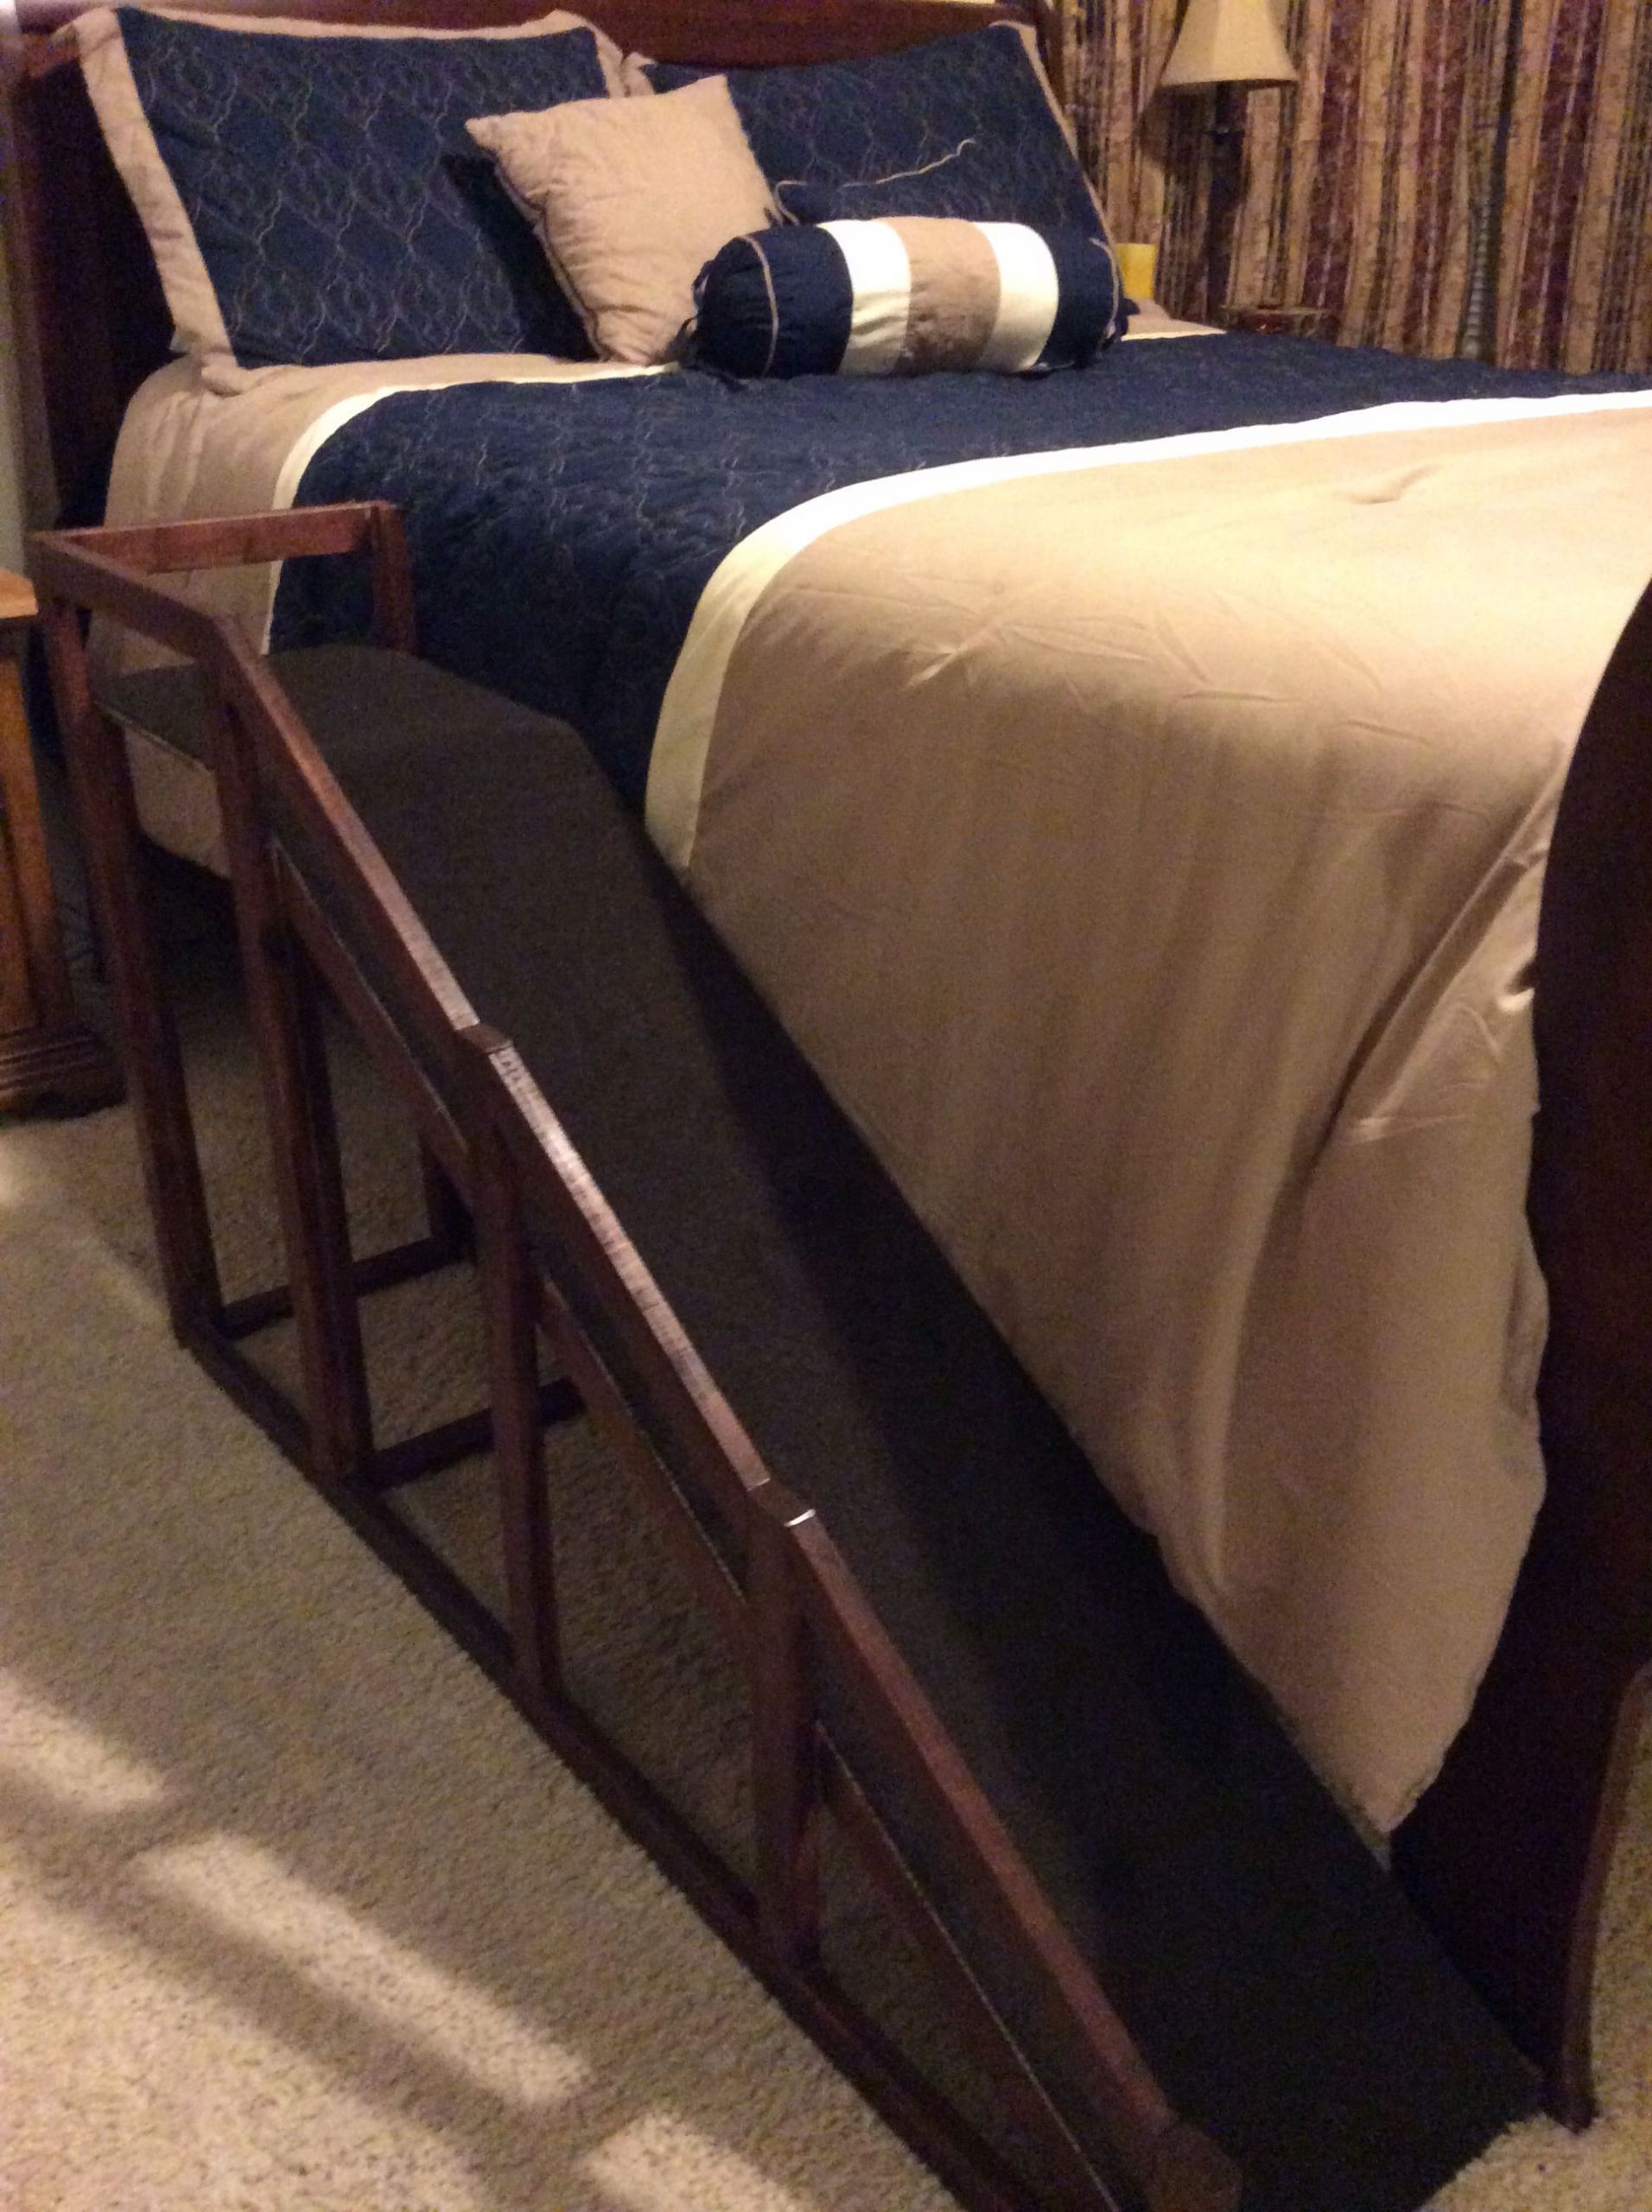 DIY Dog Ramp For High Bed
 Ramp for dog My dog could not jump into the bed so my